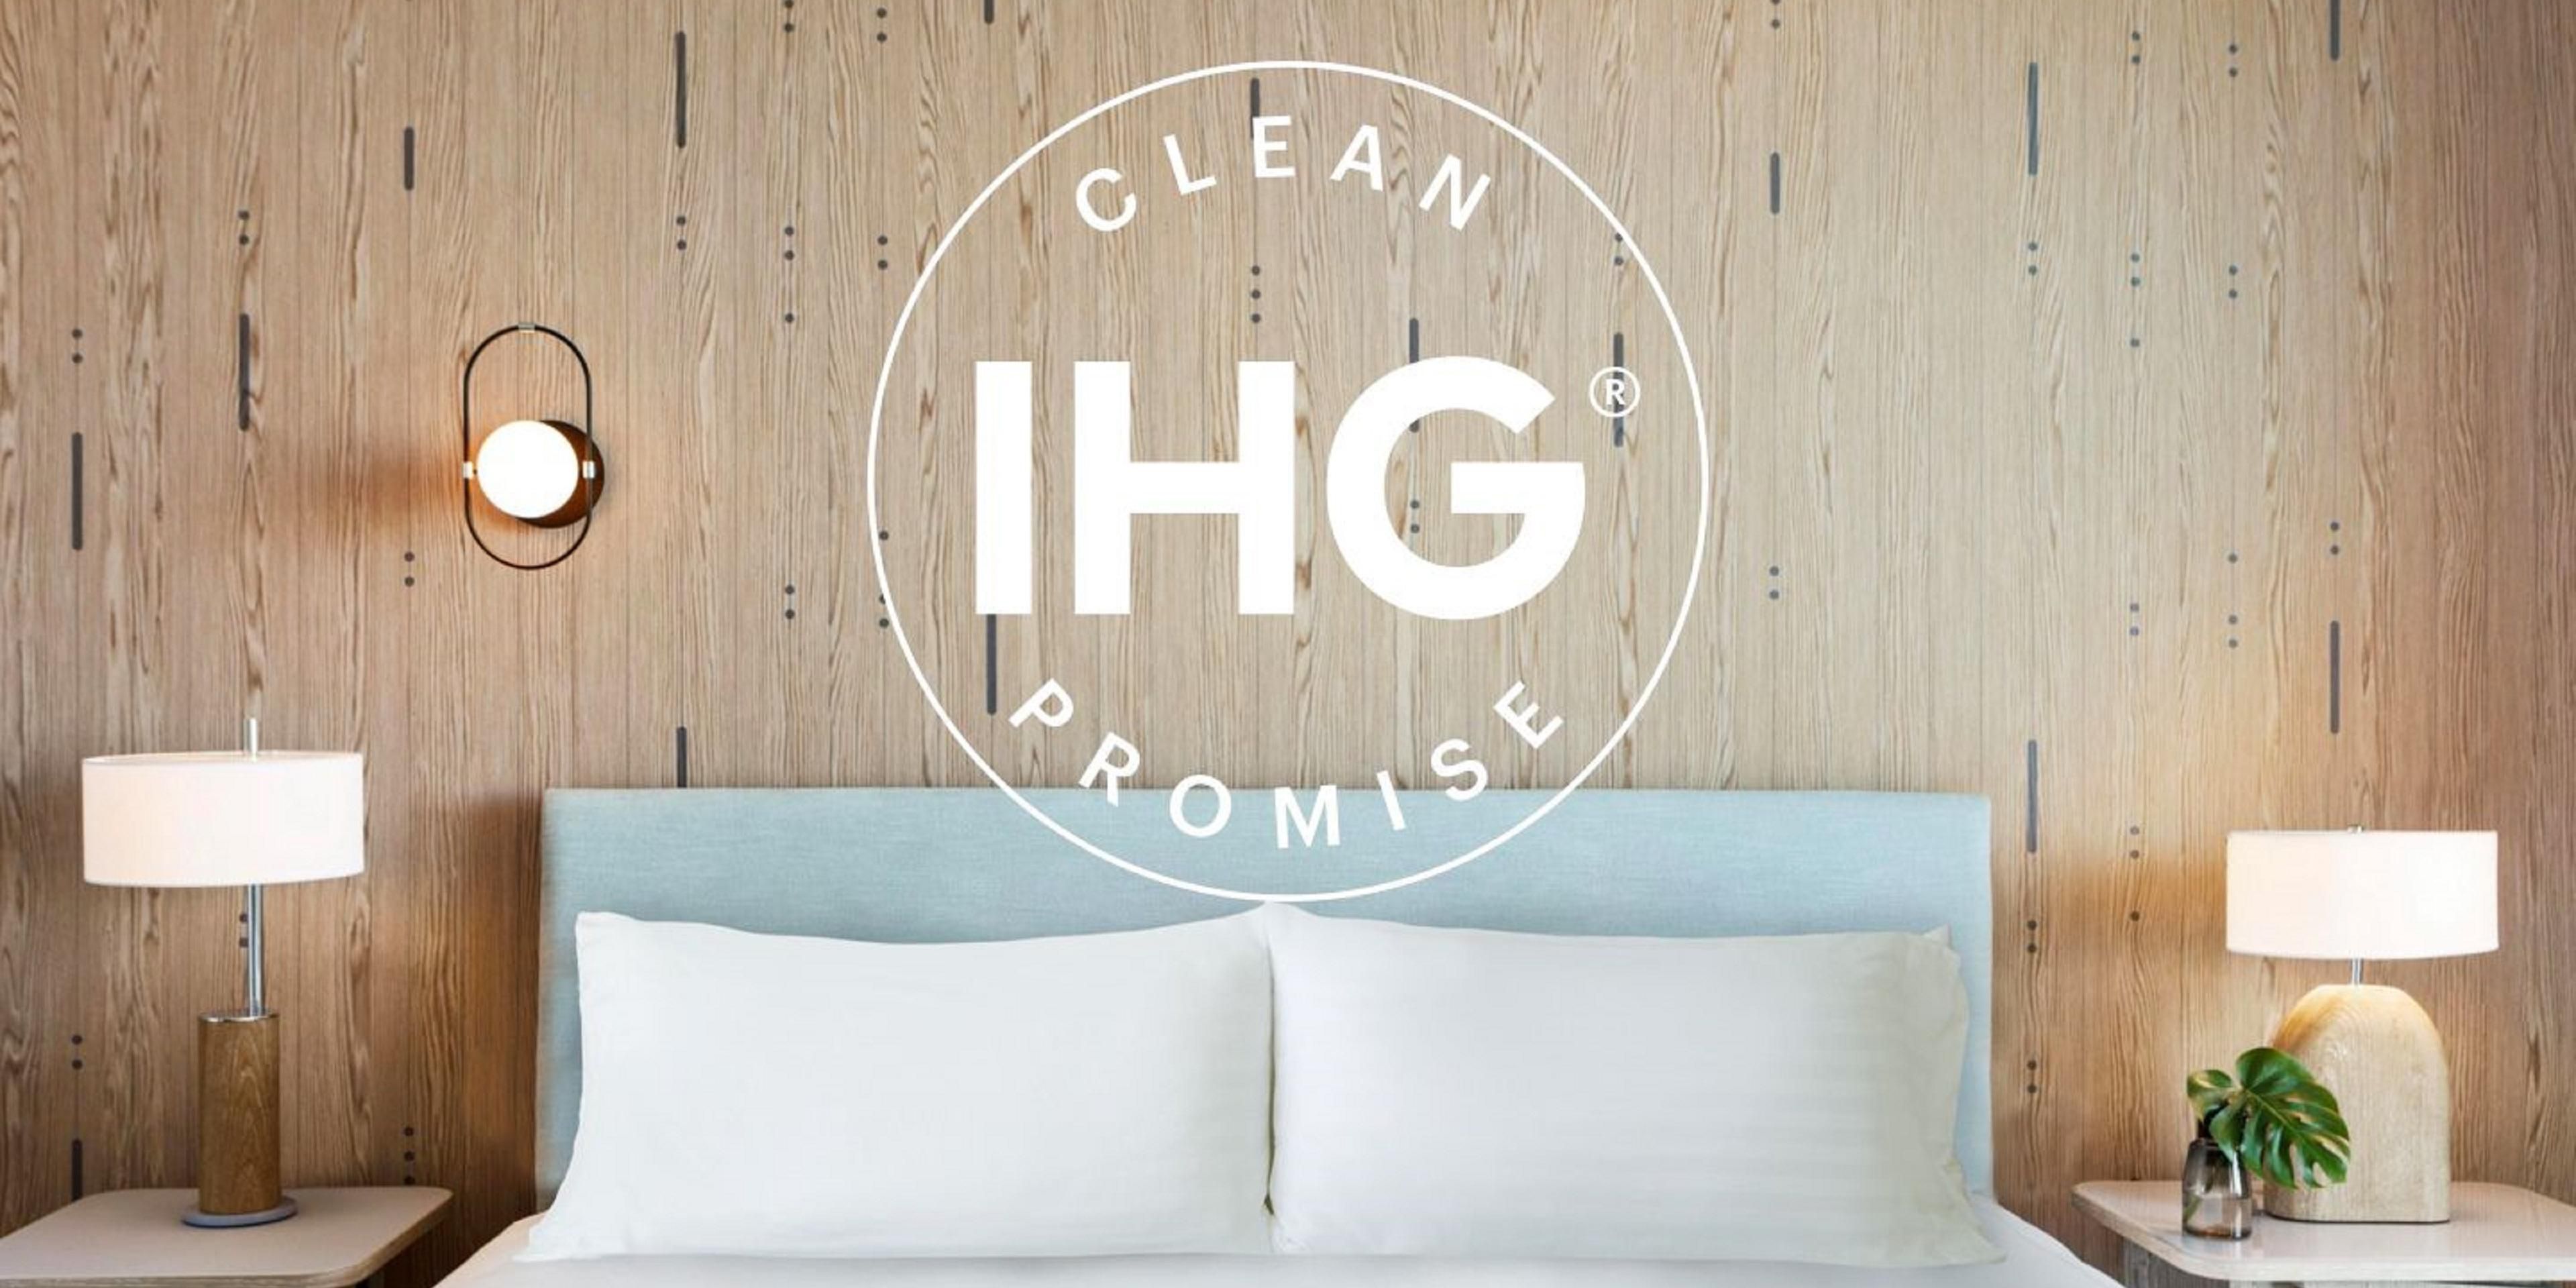 We are enhancing our global cleaning protocols in partnership with Cleveland Clinic, Ecolab, and Diversey. It is all backed by our new IHG Clean Promise to give you the confidence you need. When you are ready to travel again, we will be ready to welcome you. #IHG #TrueHospitality